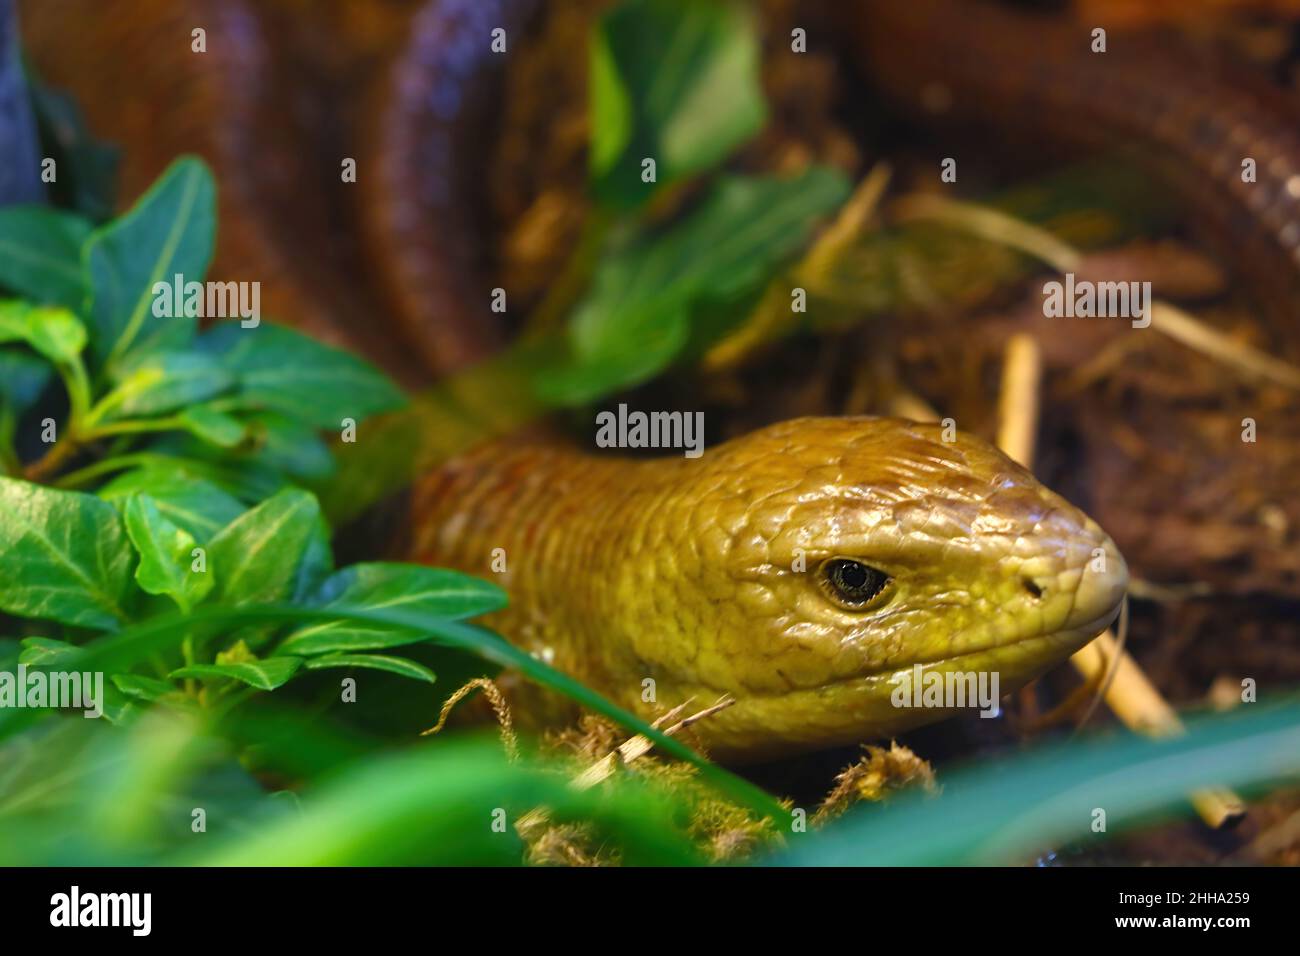 A bright yellow snake hides among the greenery. Out of focus Stock Photo